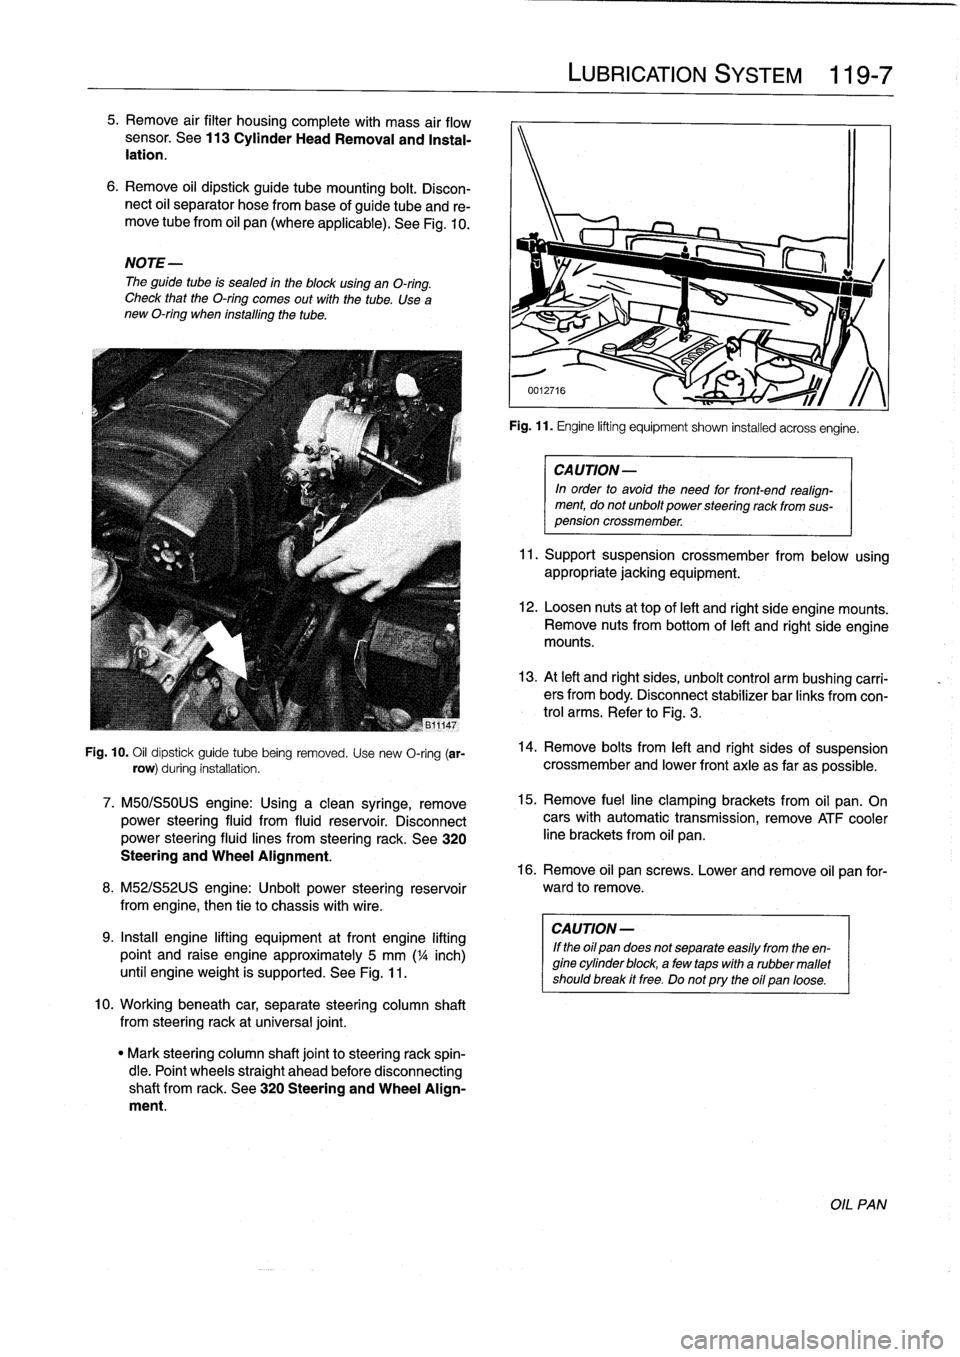 BMW M3 1996 E36 Workshop Manual 
5
.
Remove
air
filter
housingcomplete
with
mass
air
flow
sensor
.
See113
Cylinder
HeadRemoval
and
Instal-
lation
.

6
.
Remove
oil
dipstick
guide
tube
mounting
bolt
.
Discon-
nect
oil
separator
hose
